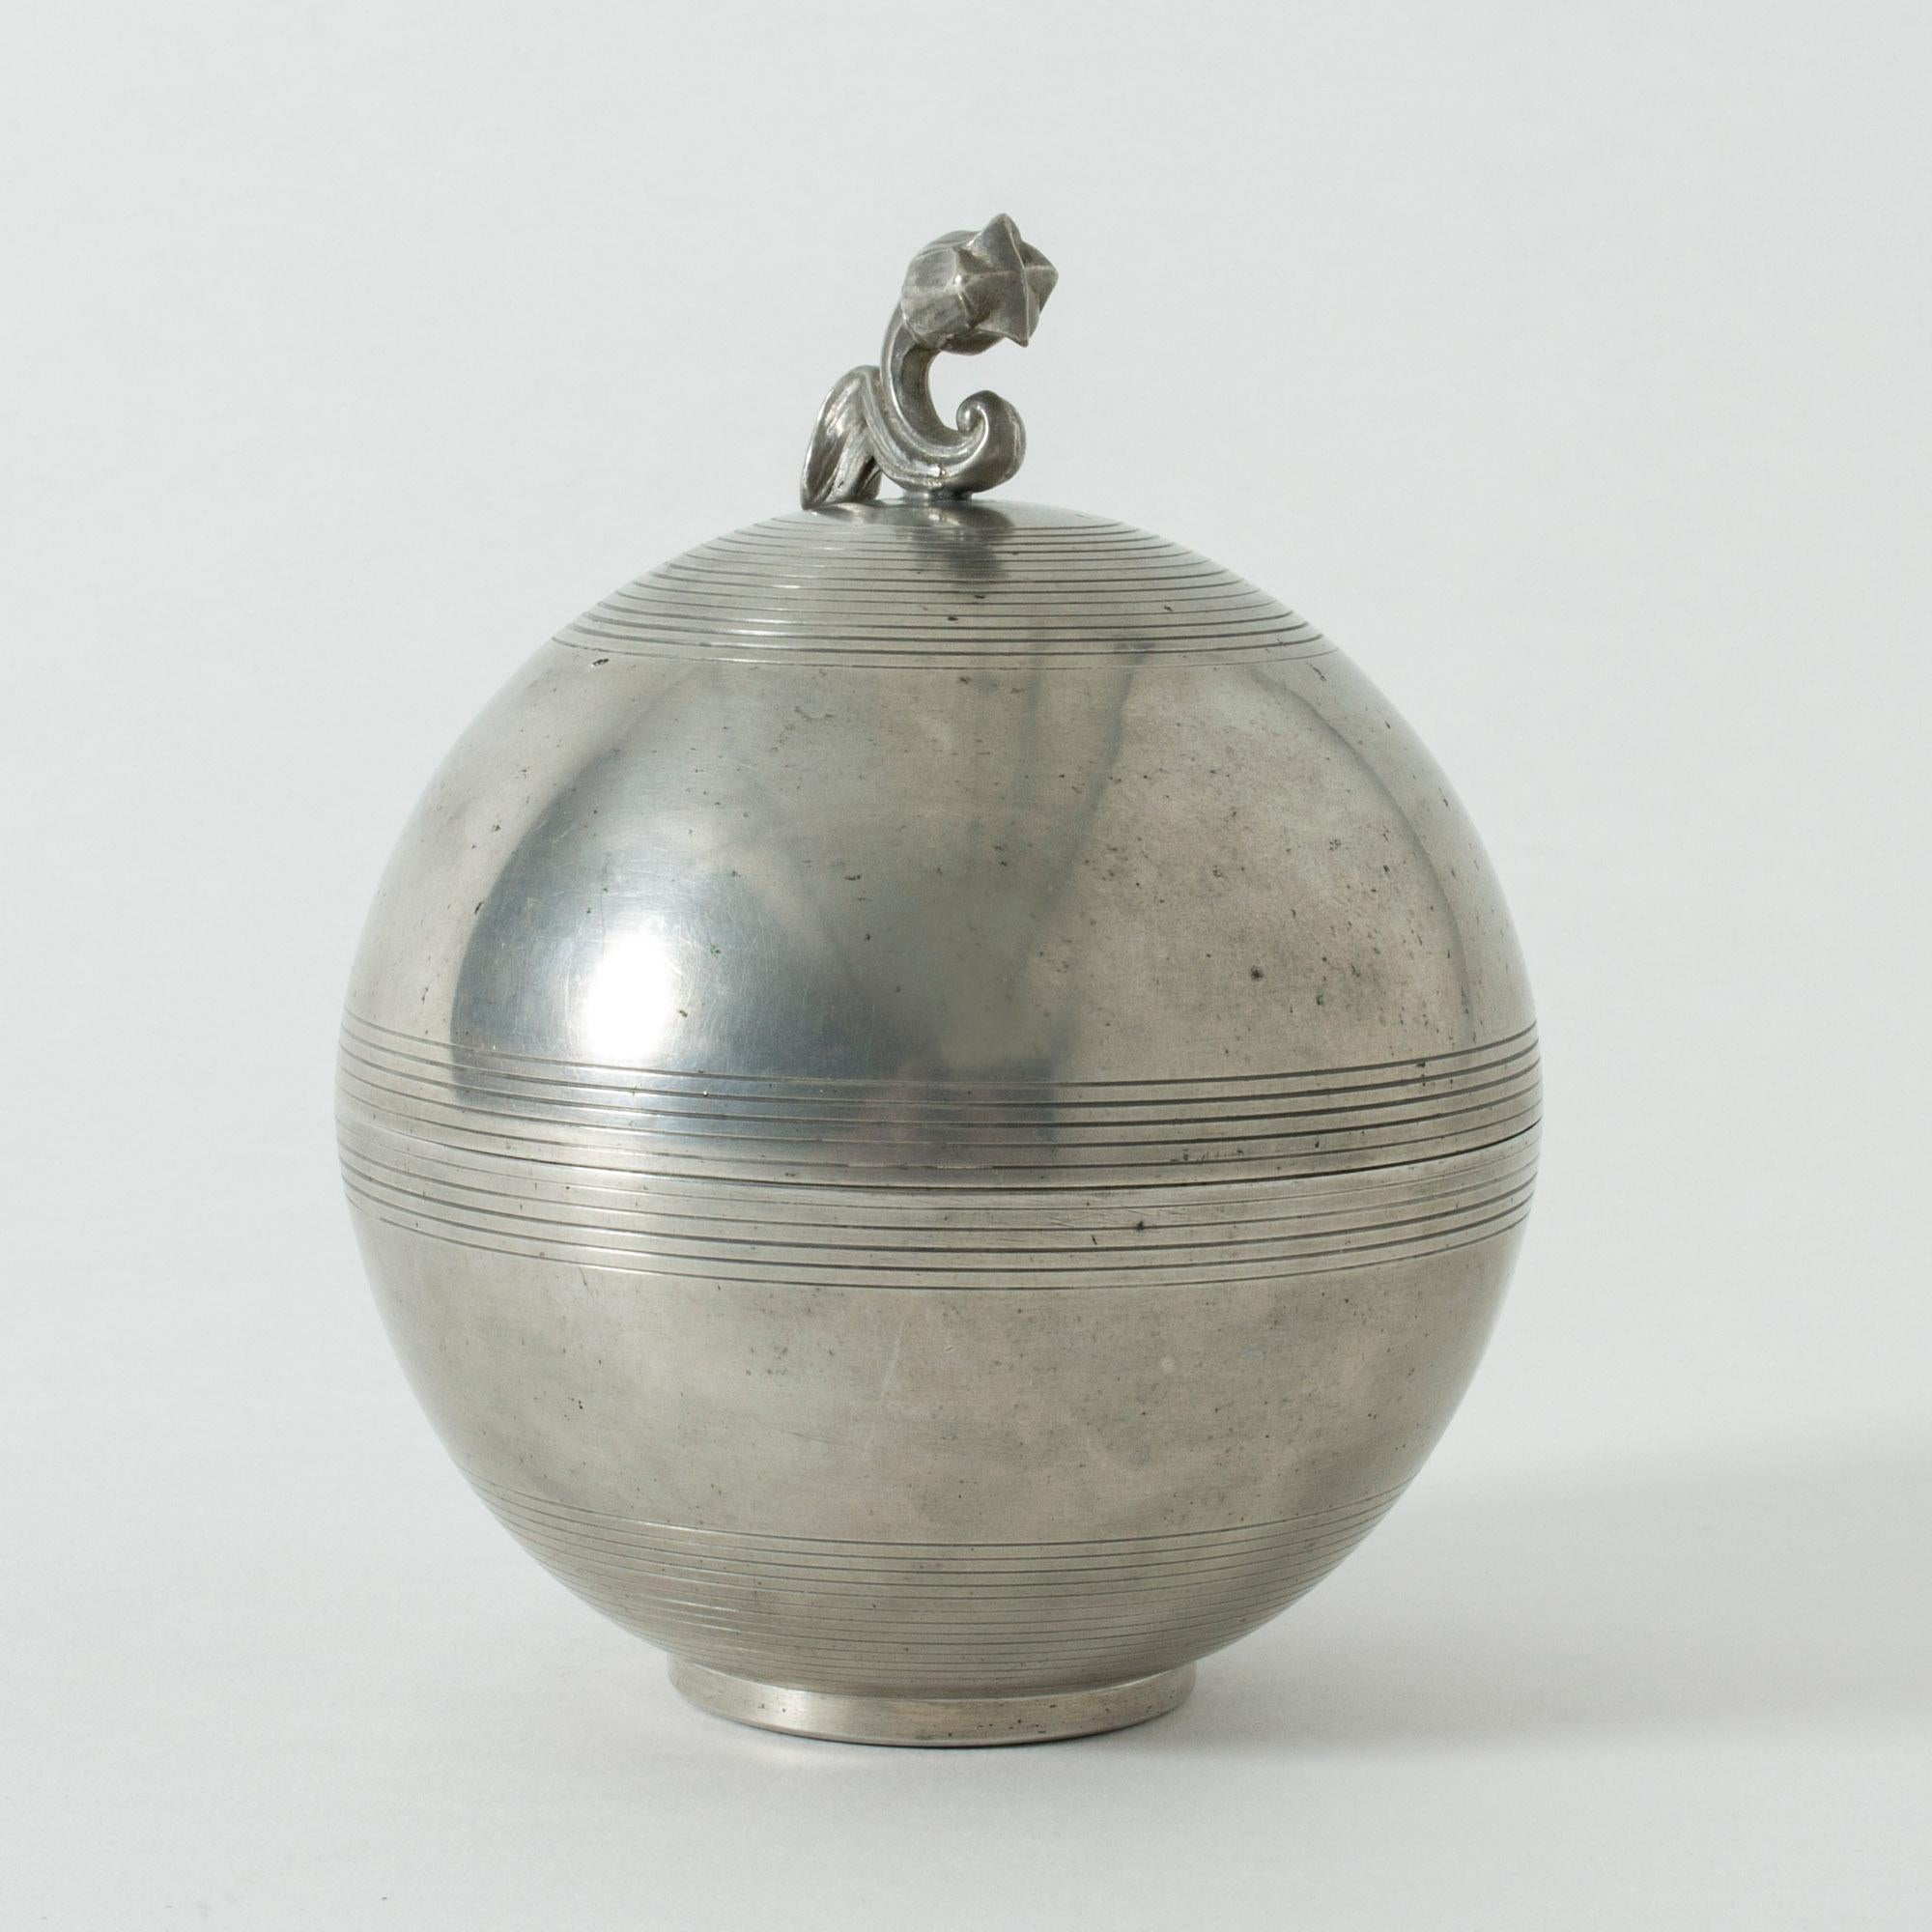 Beautiful pewter jar by Sylvia Stave, in a smooth, round design with decorative stripes. Adorned with a stylized tulip on the top.